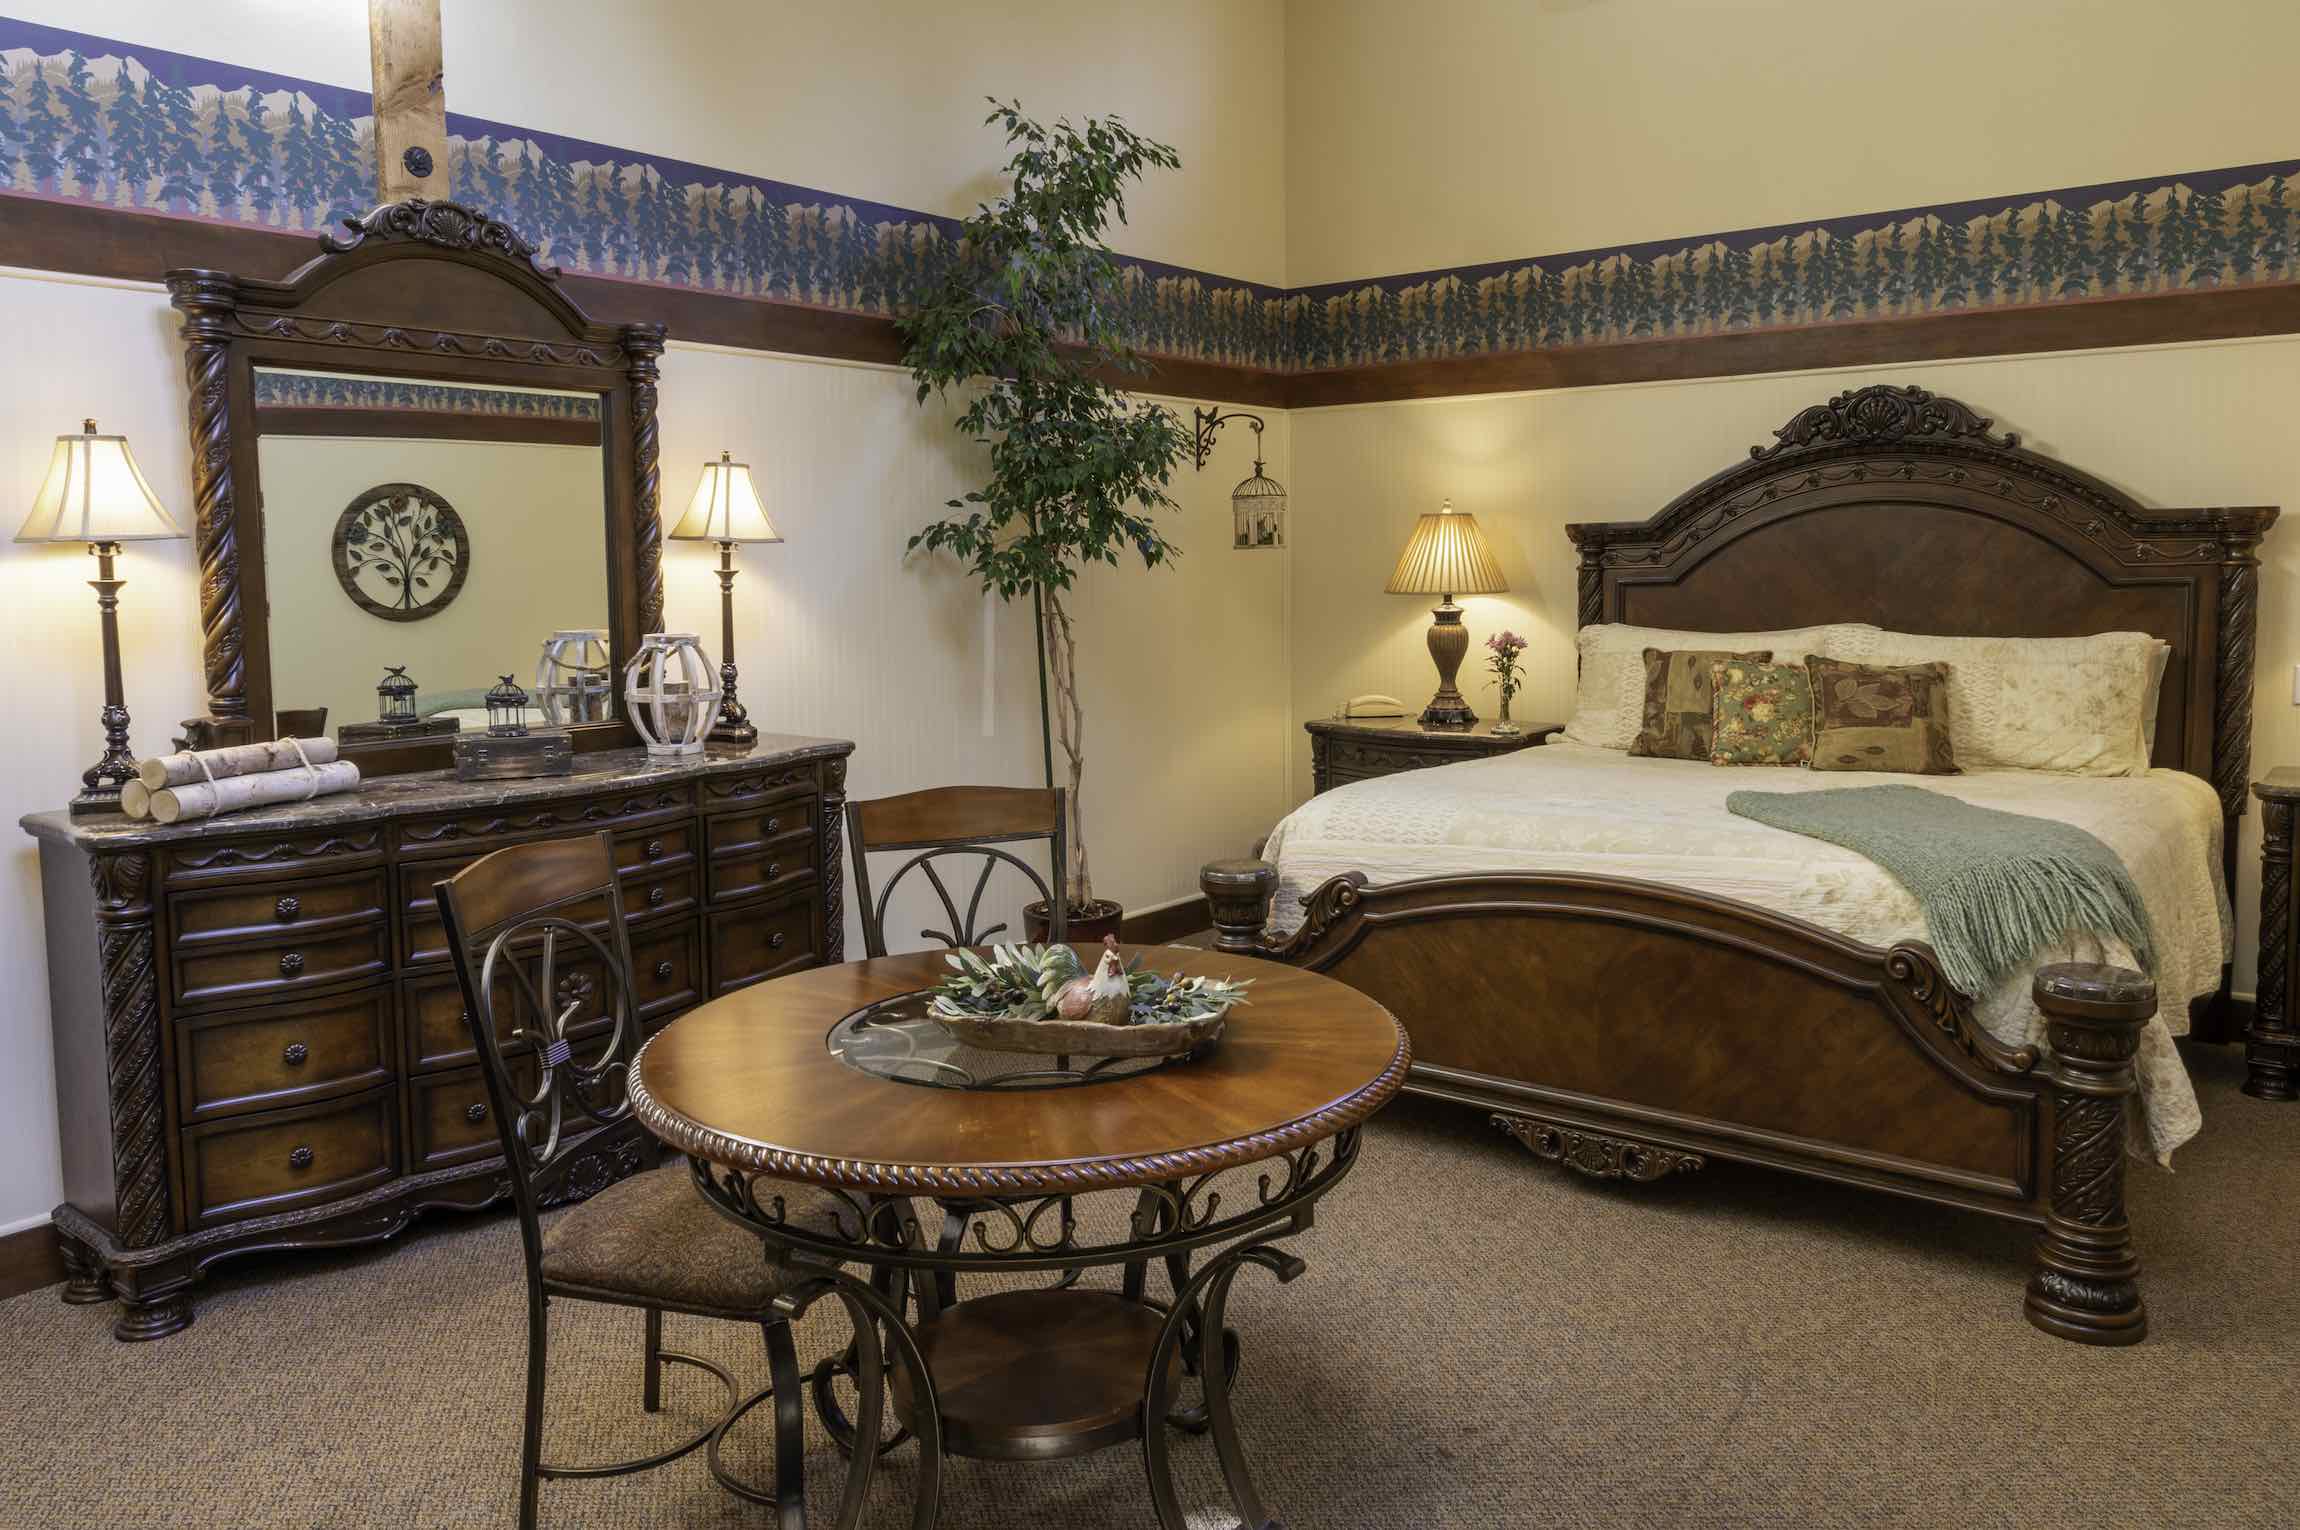 Stay at Country Willows Inn and you’ll experience the best Ashland accommodations in a quiet, peaceful setting. Located just two miles from downtown Ashland.